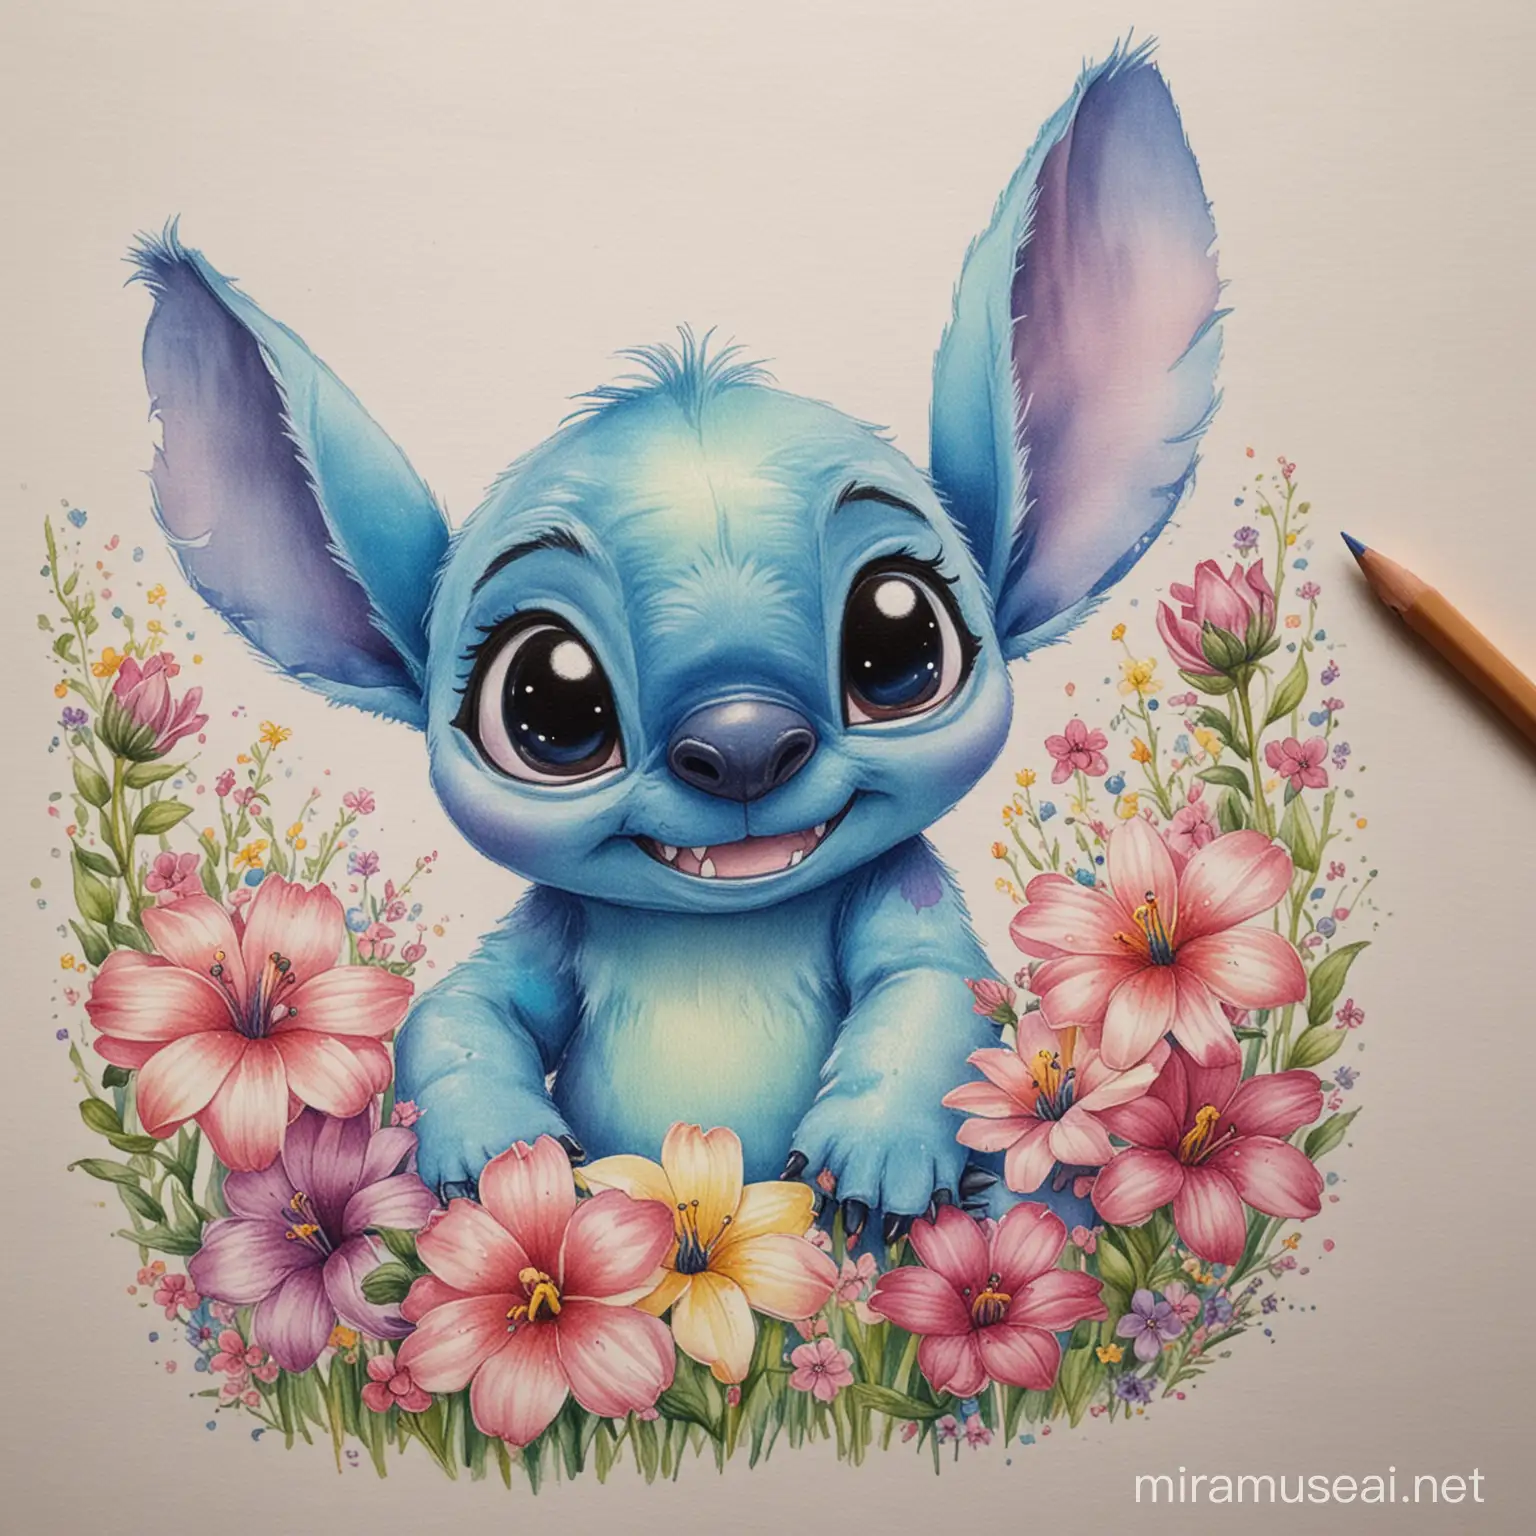 Baby Stitch and Mother Surrounded by Flowers